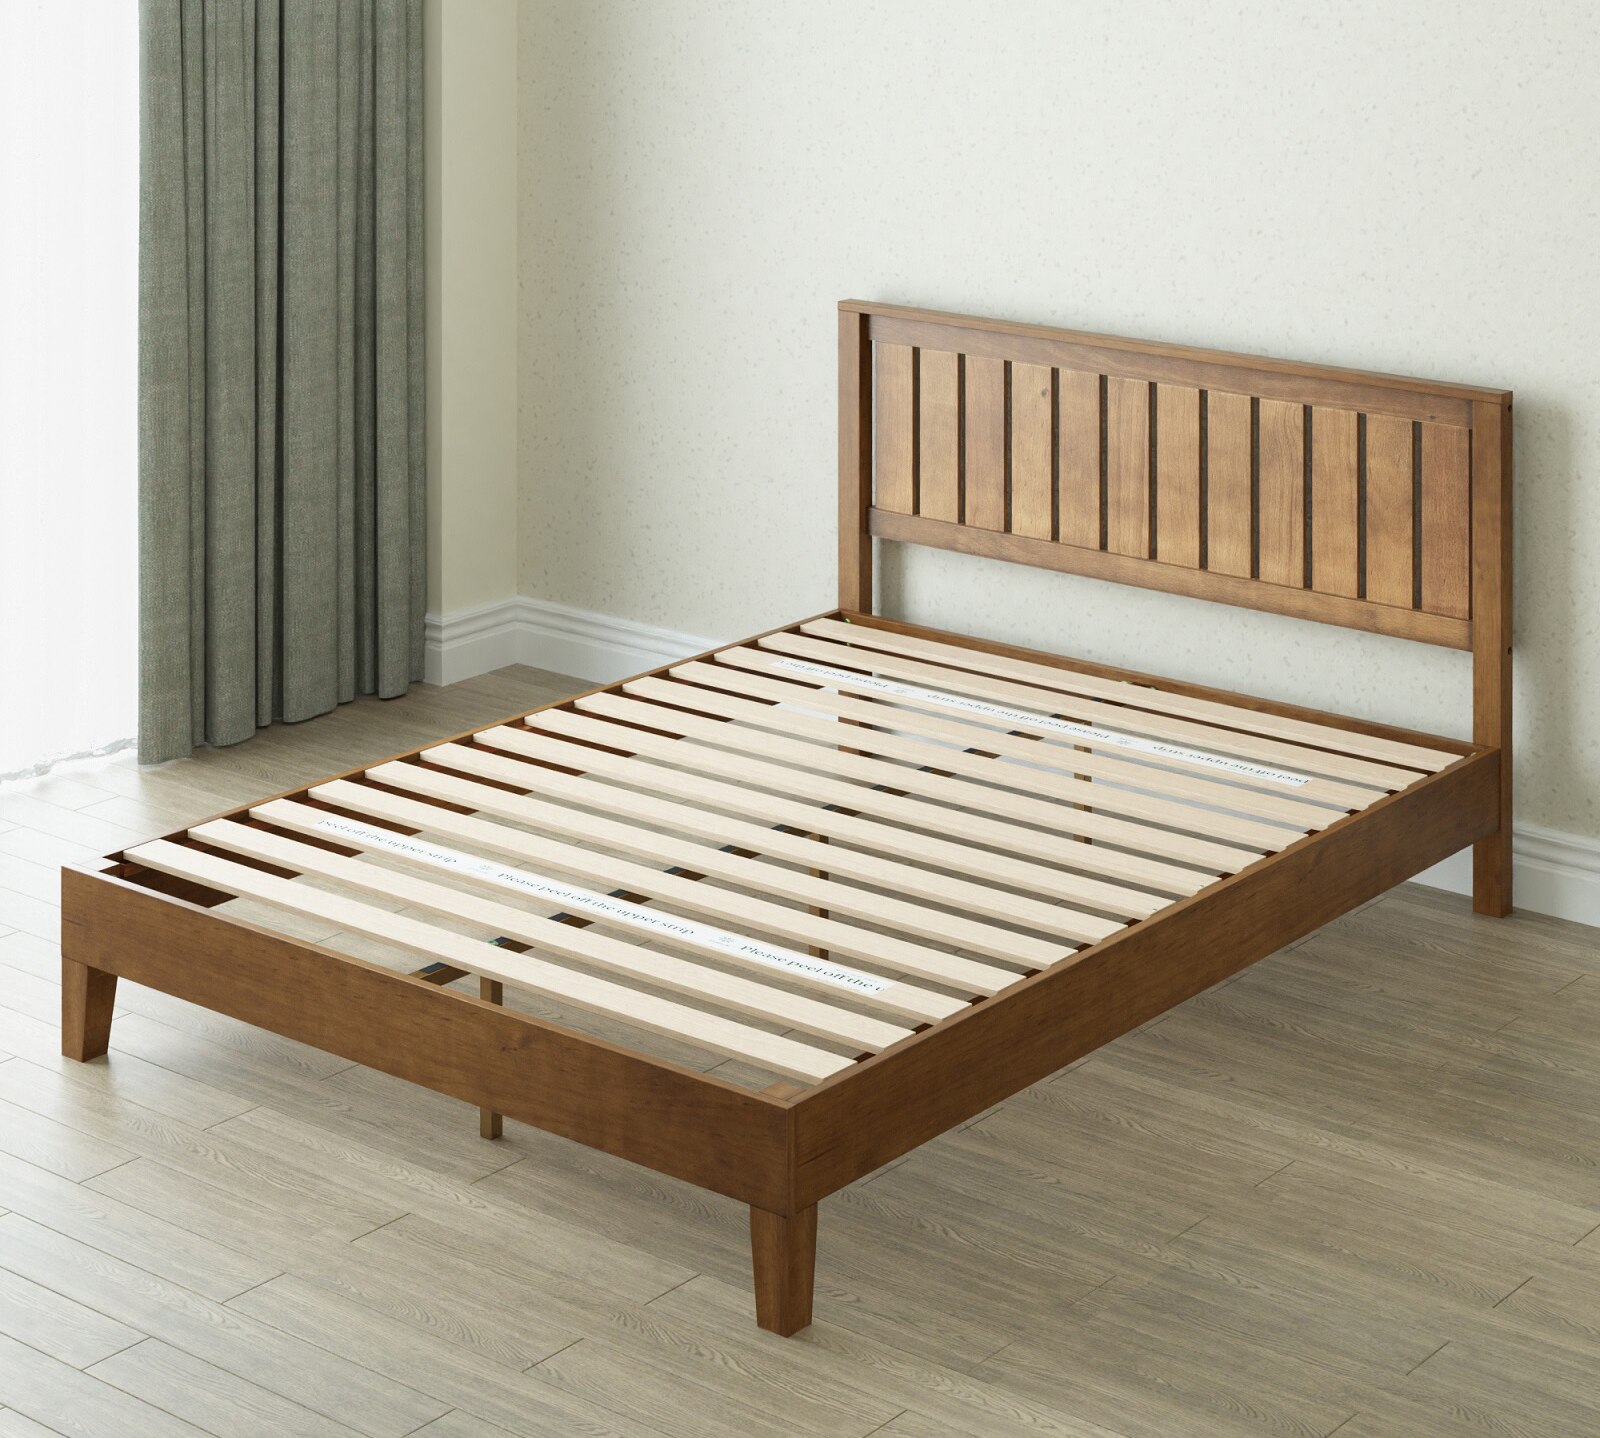 Alexis 37” Deluxe Wood Platform Bed Frame with Headboard